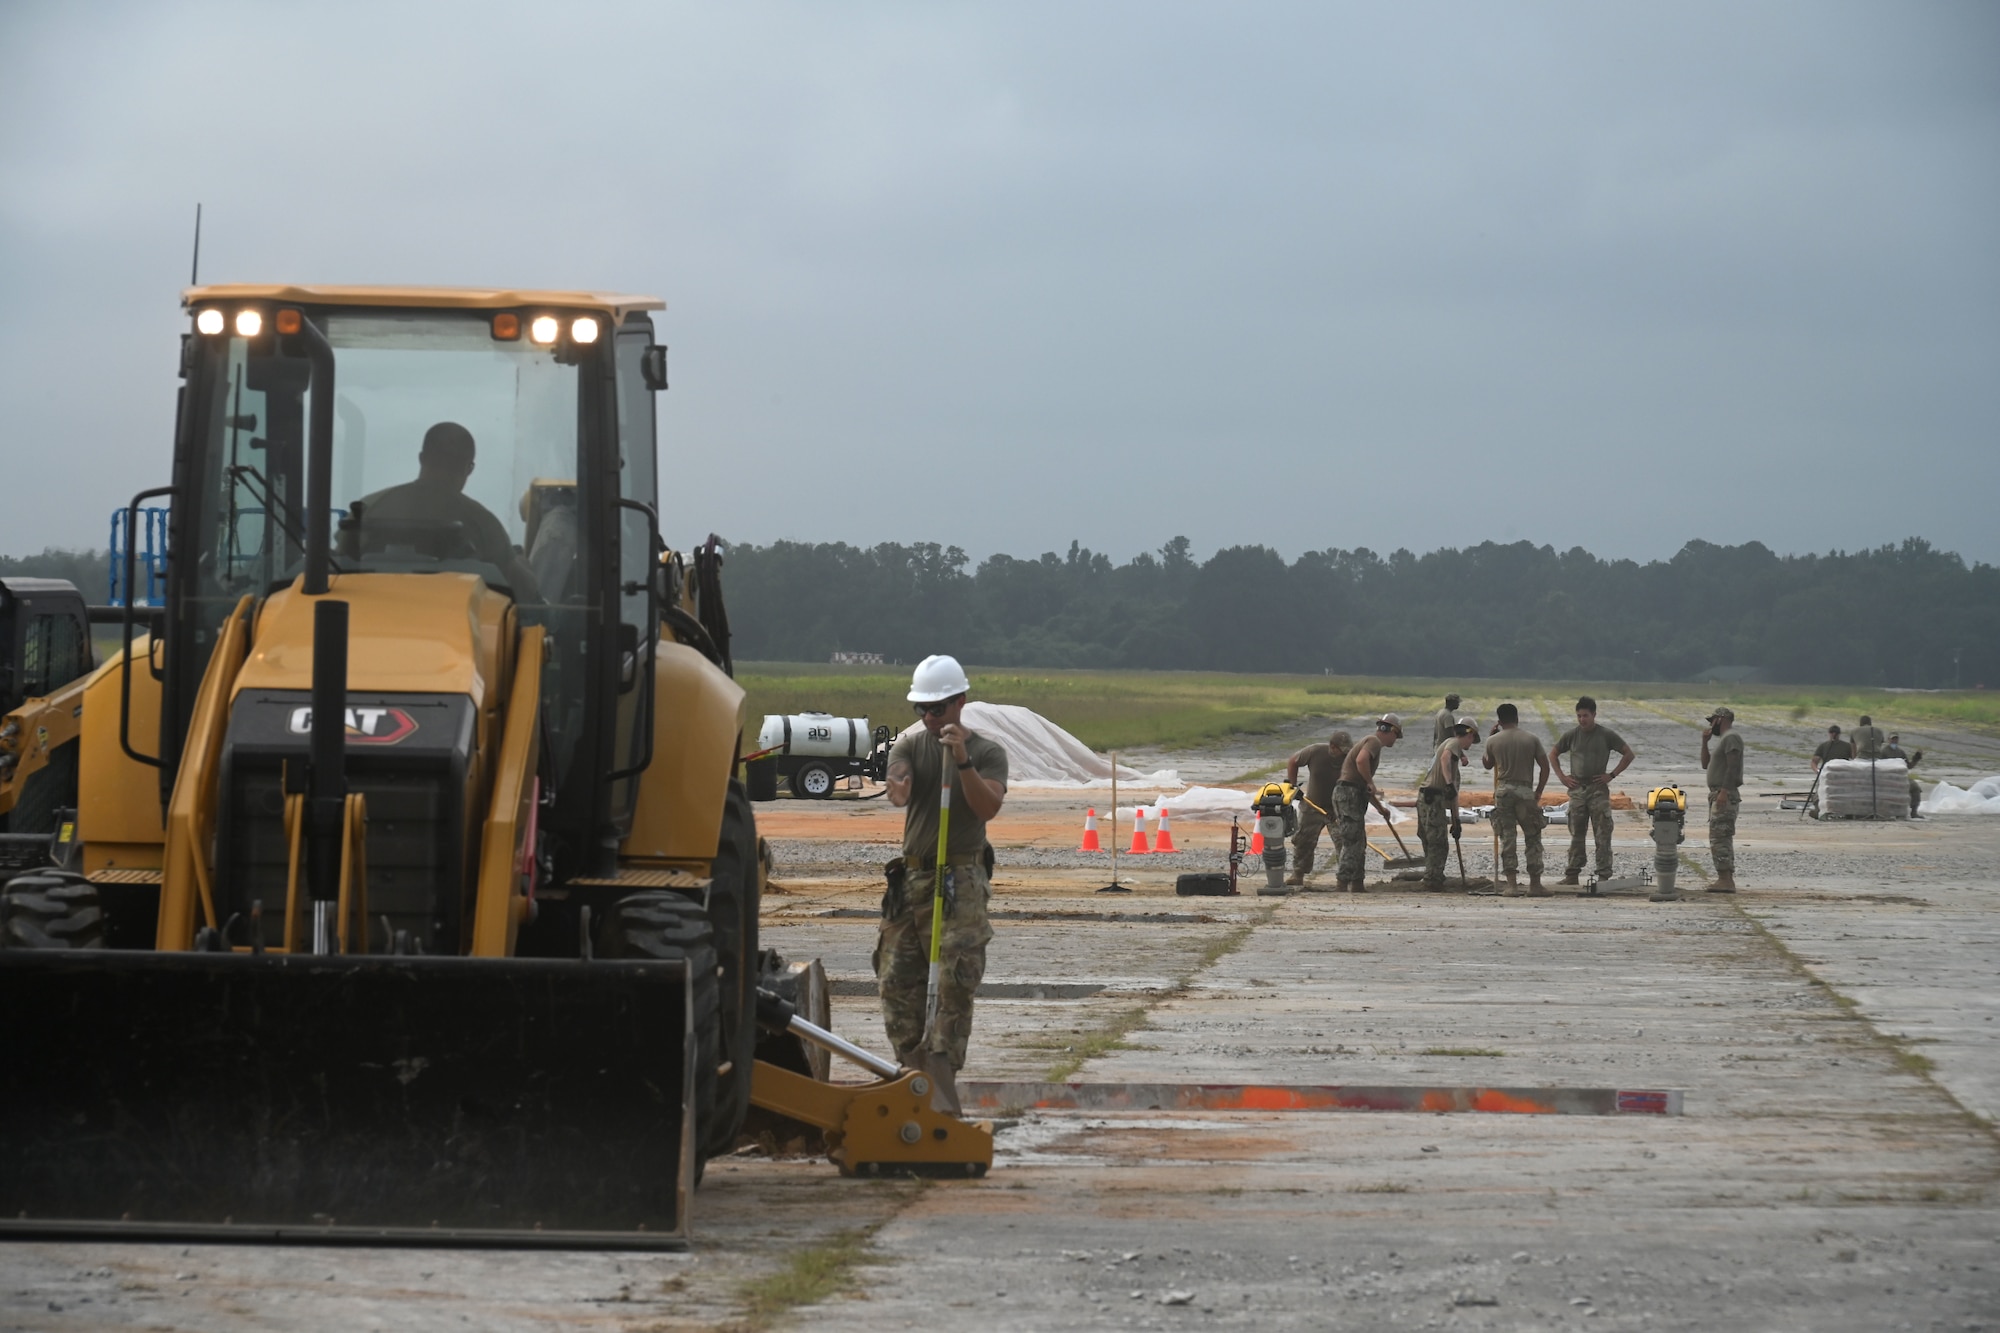 U.S. Air Force civil engineers from the pavements and construction equipment career field, known as the Dirt Boys from eight separate units, team up with U.S. Navy Seabees from the Naval Mobile Construction Battalion 133, Gulfport, Mississippi for an Expedient and Expeditionary Airfield Damage Repair (E-ADR) demonstration at McEntire Joint National Guard Base, South Carolina, Aug. 27, 2021. The purpose of the training is to provide just enough, just in time repair capability with minimal cost and materials in a wartime situation.  (U.S. Air National Guard photo by Senior Master Sgt. Edward Snyder, 169th Fighter Wing Public Affairs)